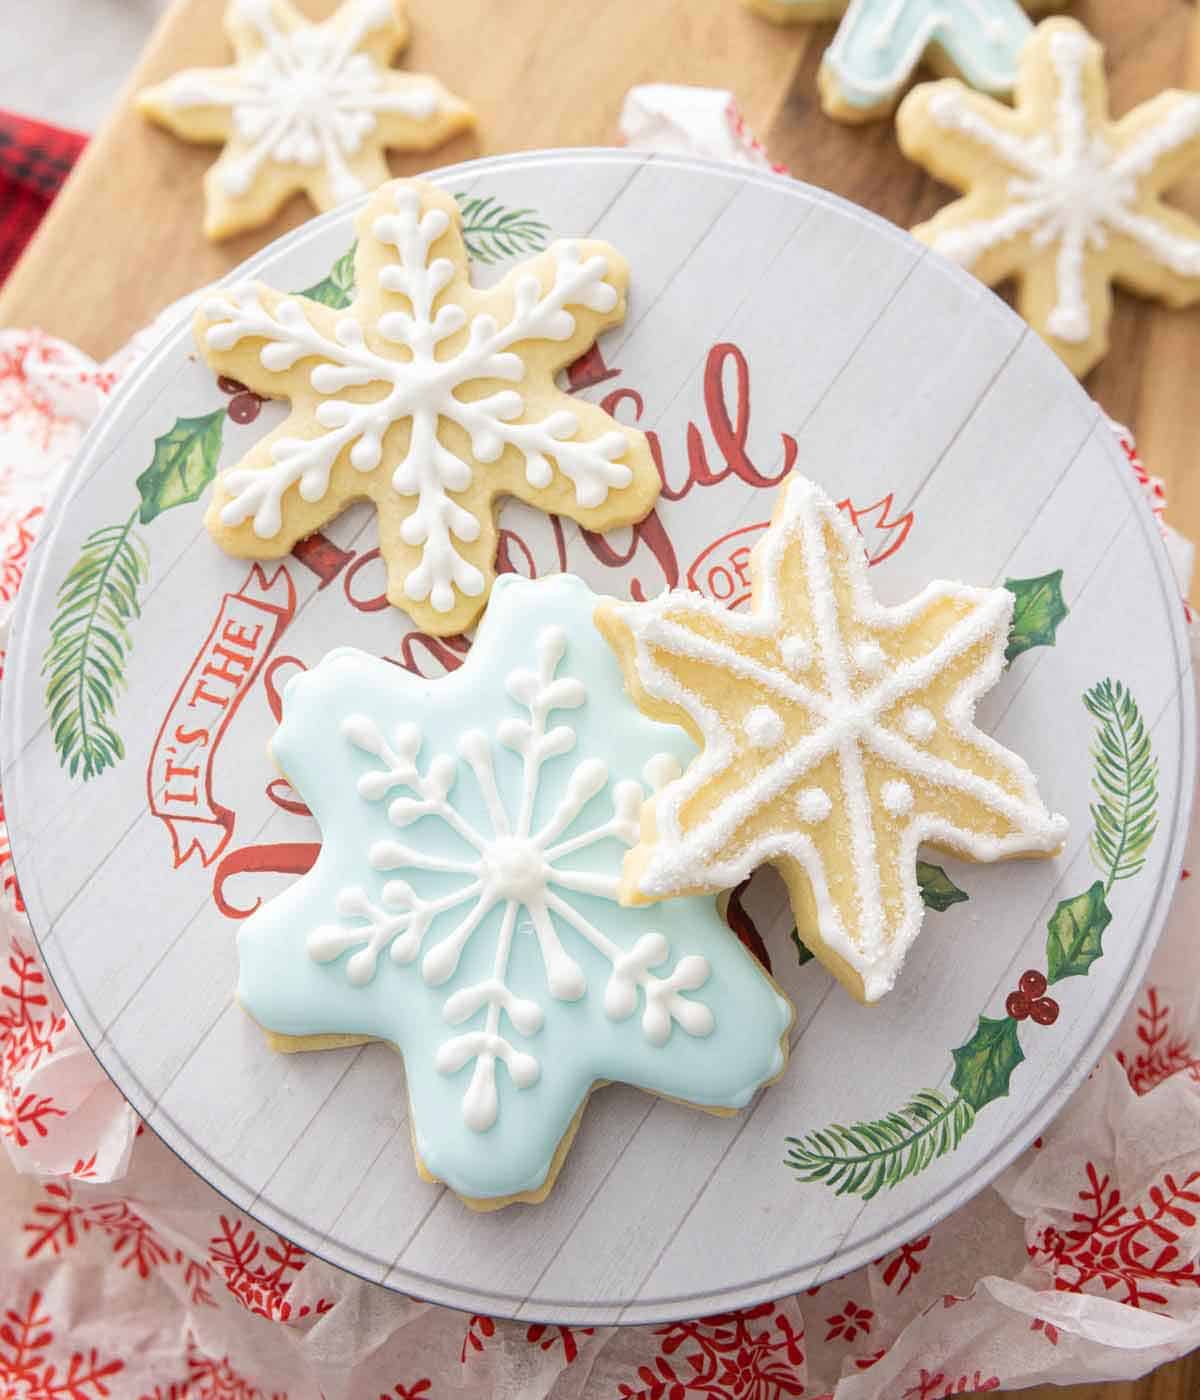 A plate with three snowflake cookies with different decorative icing.